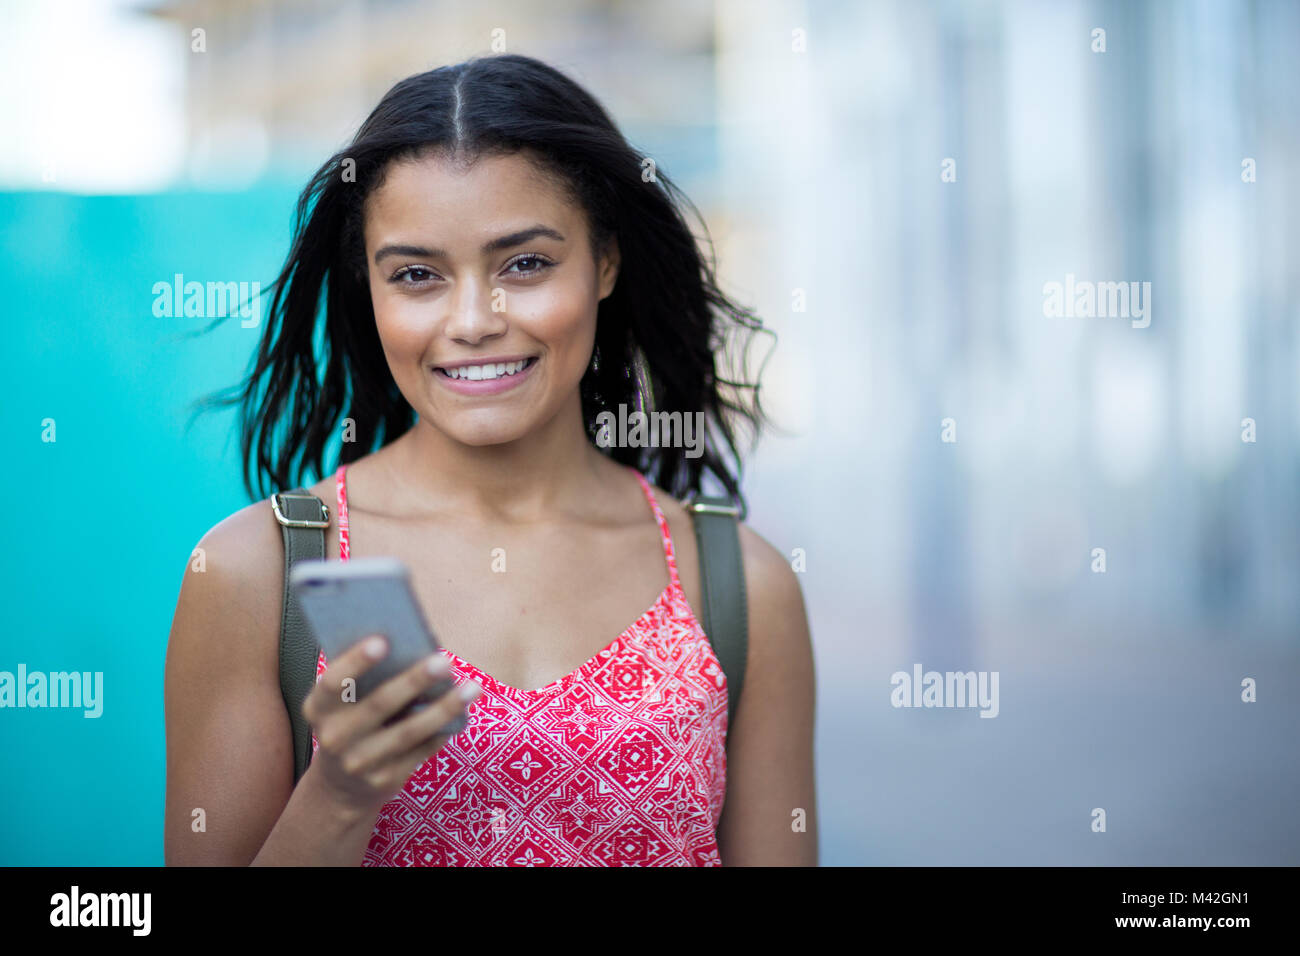 Portrait of young adult commuting and using smartphone Stock Photo